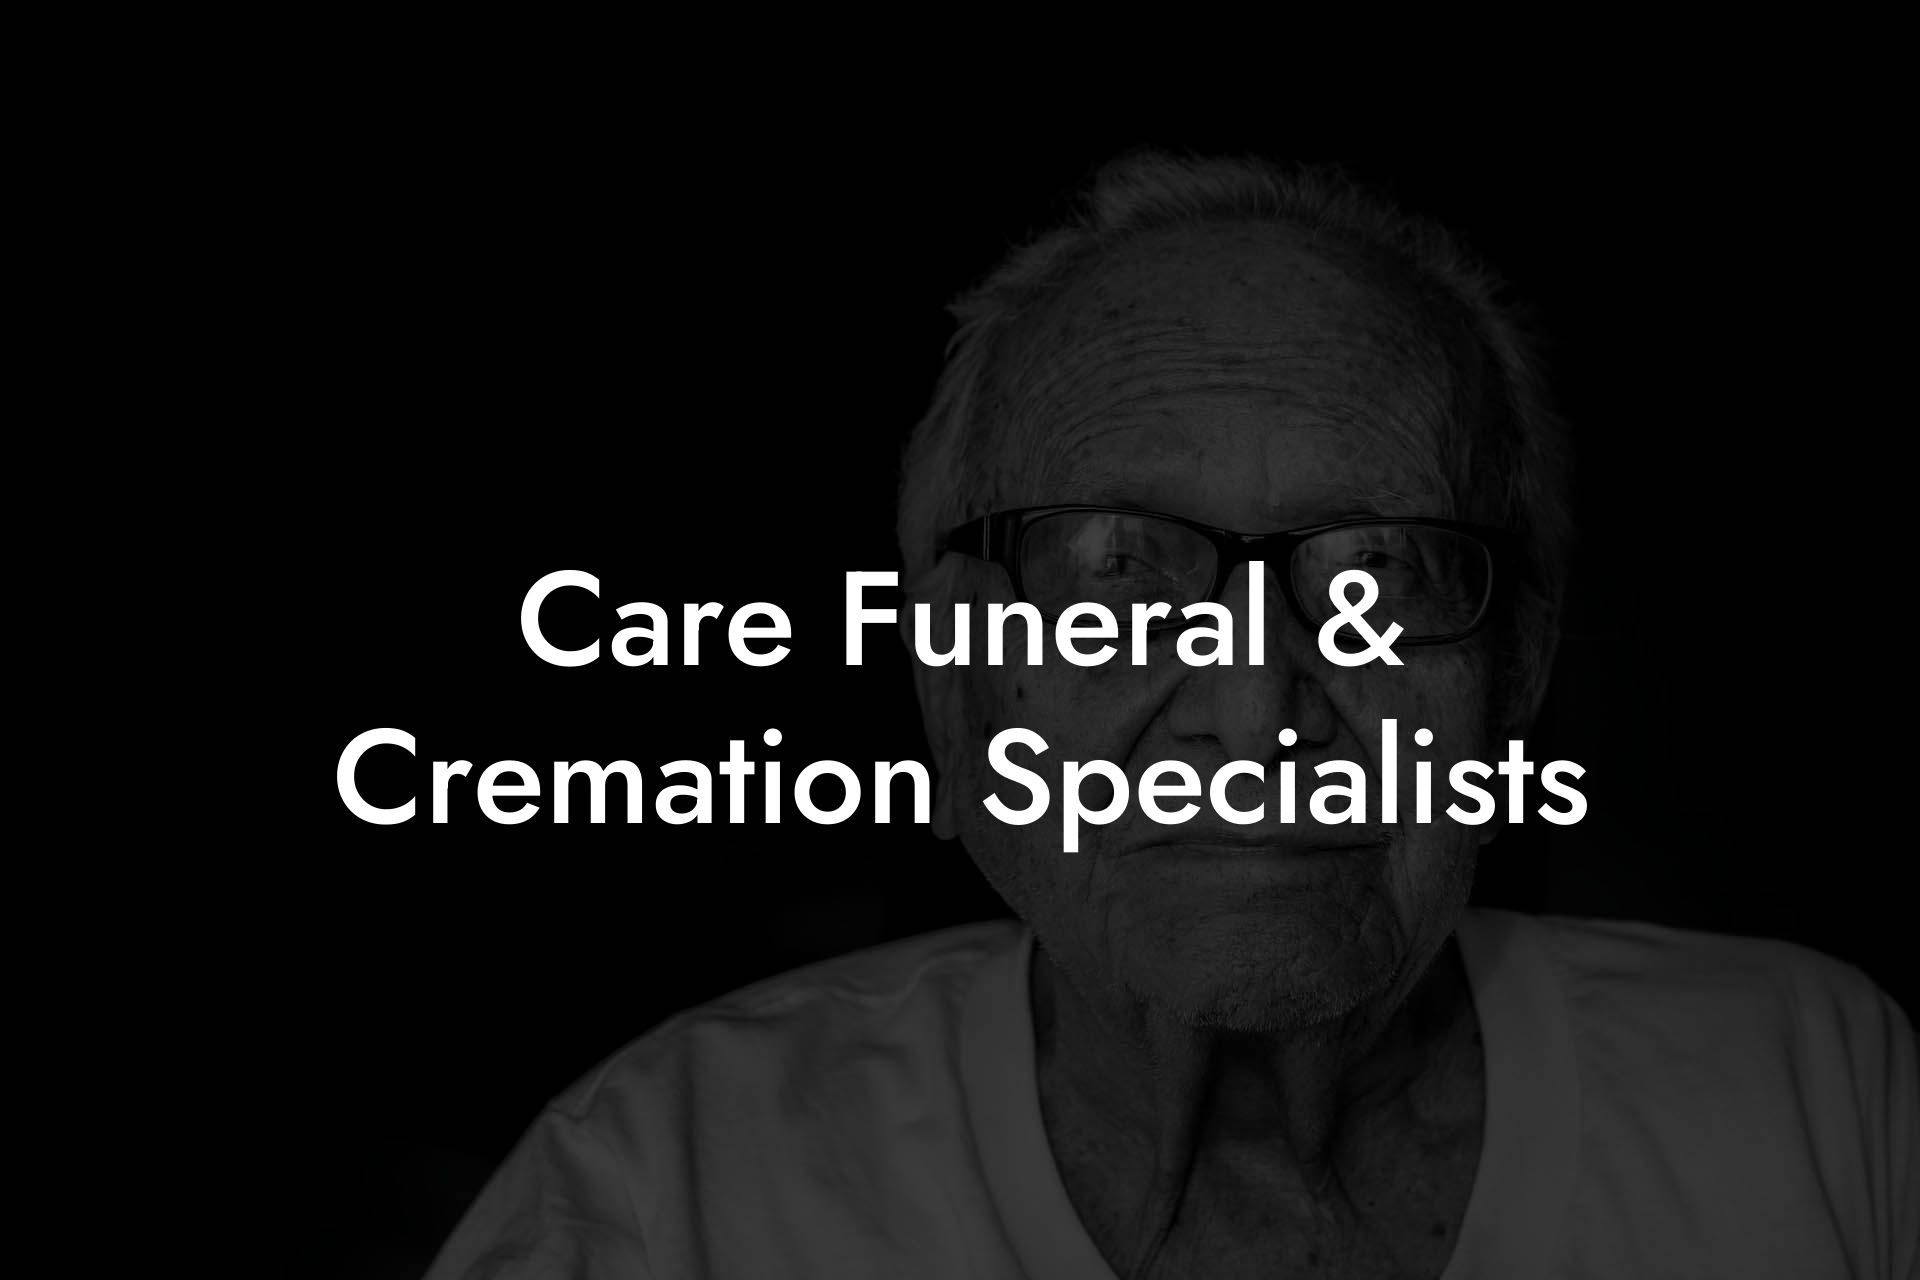 Care Funeral & Cremation Specialists